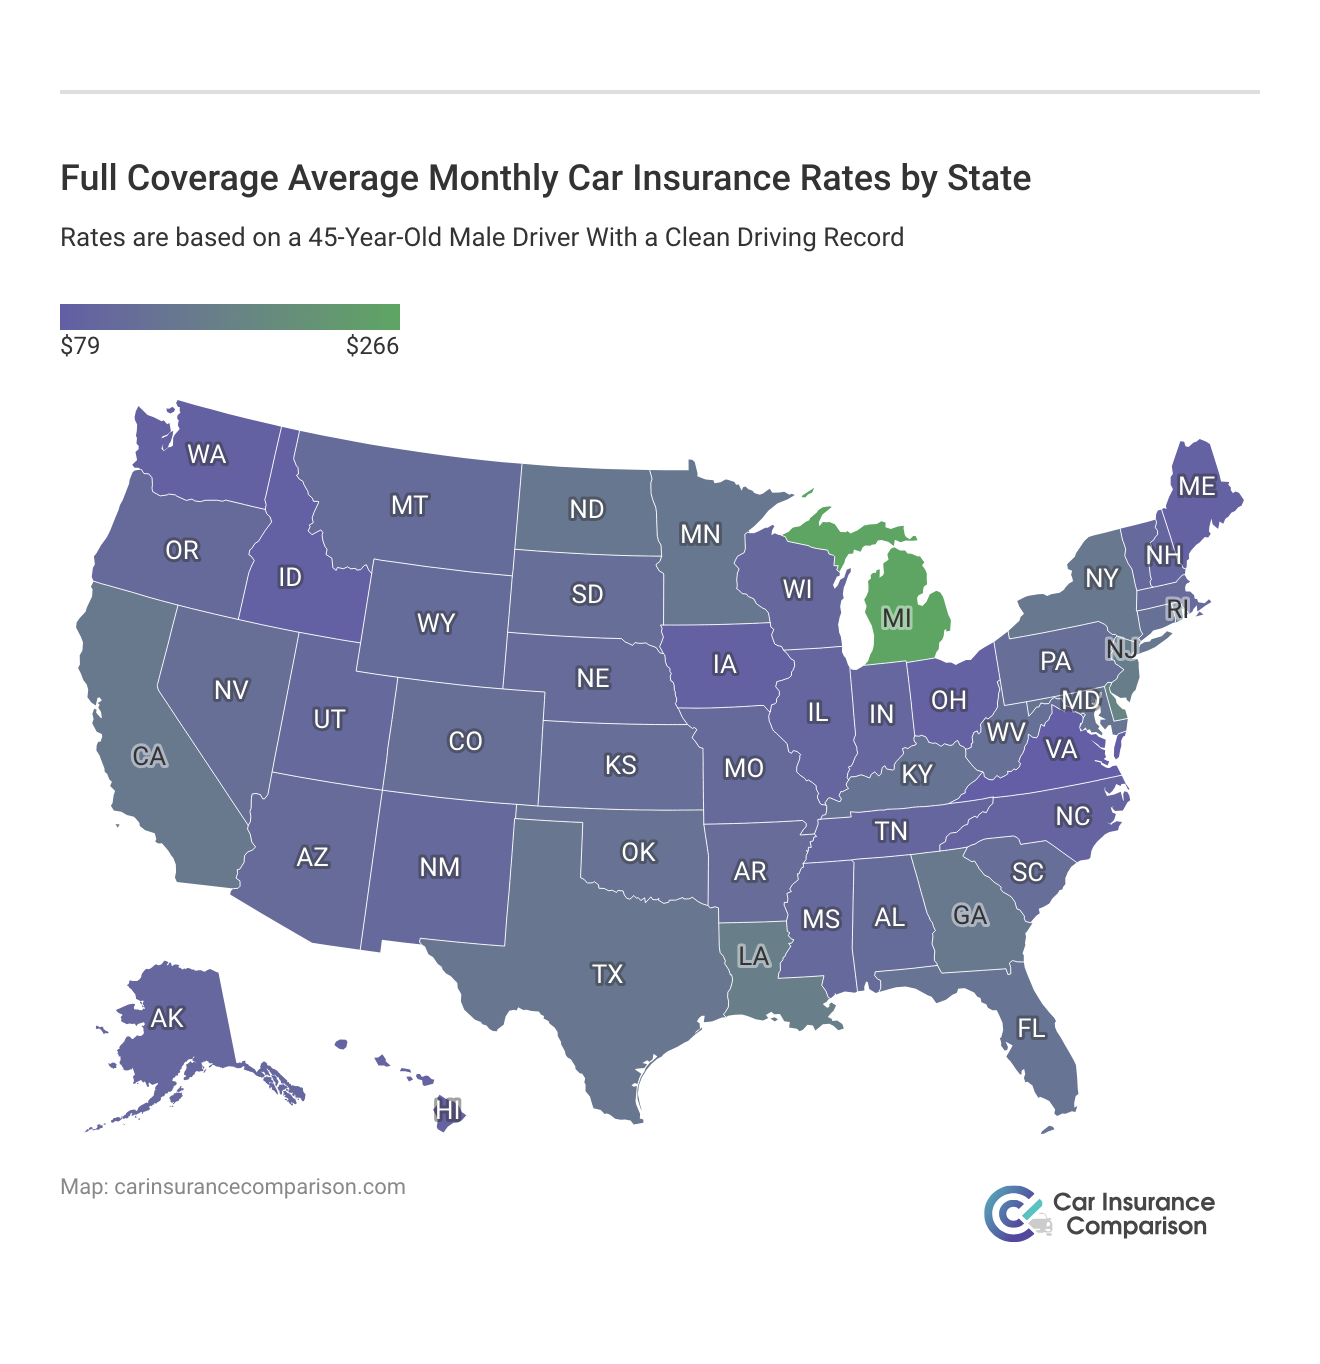 <h3>Full Coverage Average Monthly Car Insurance Rates by State</h3>